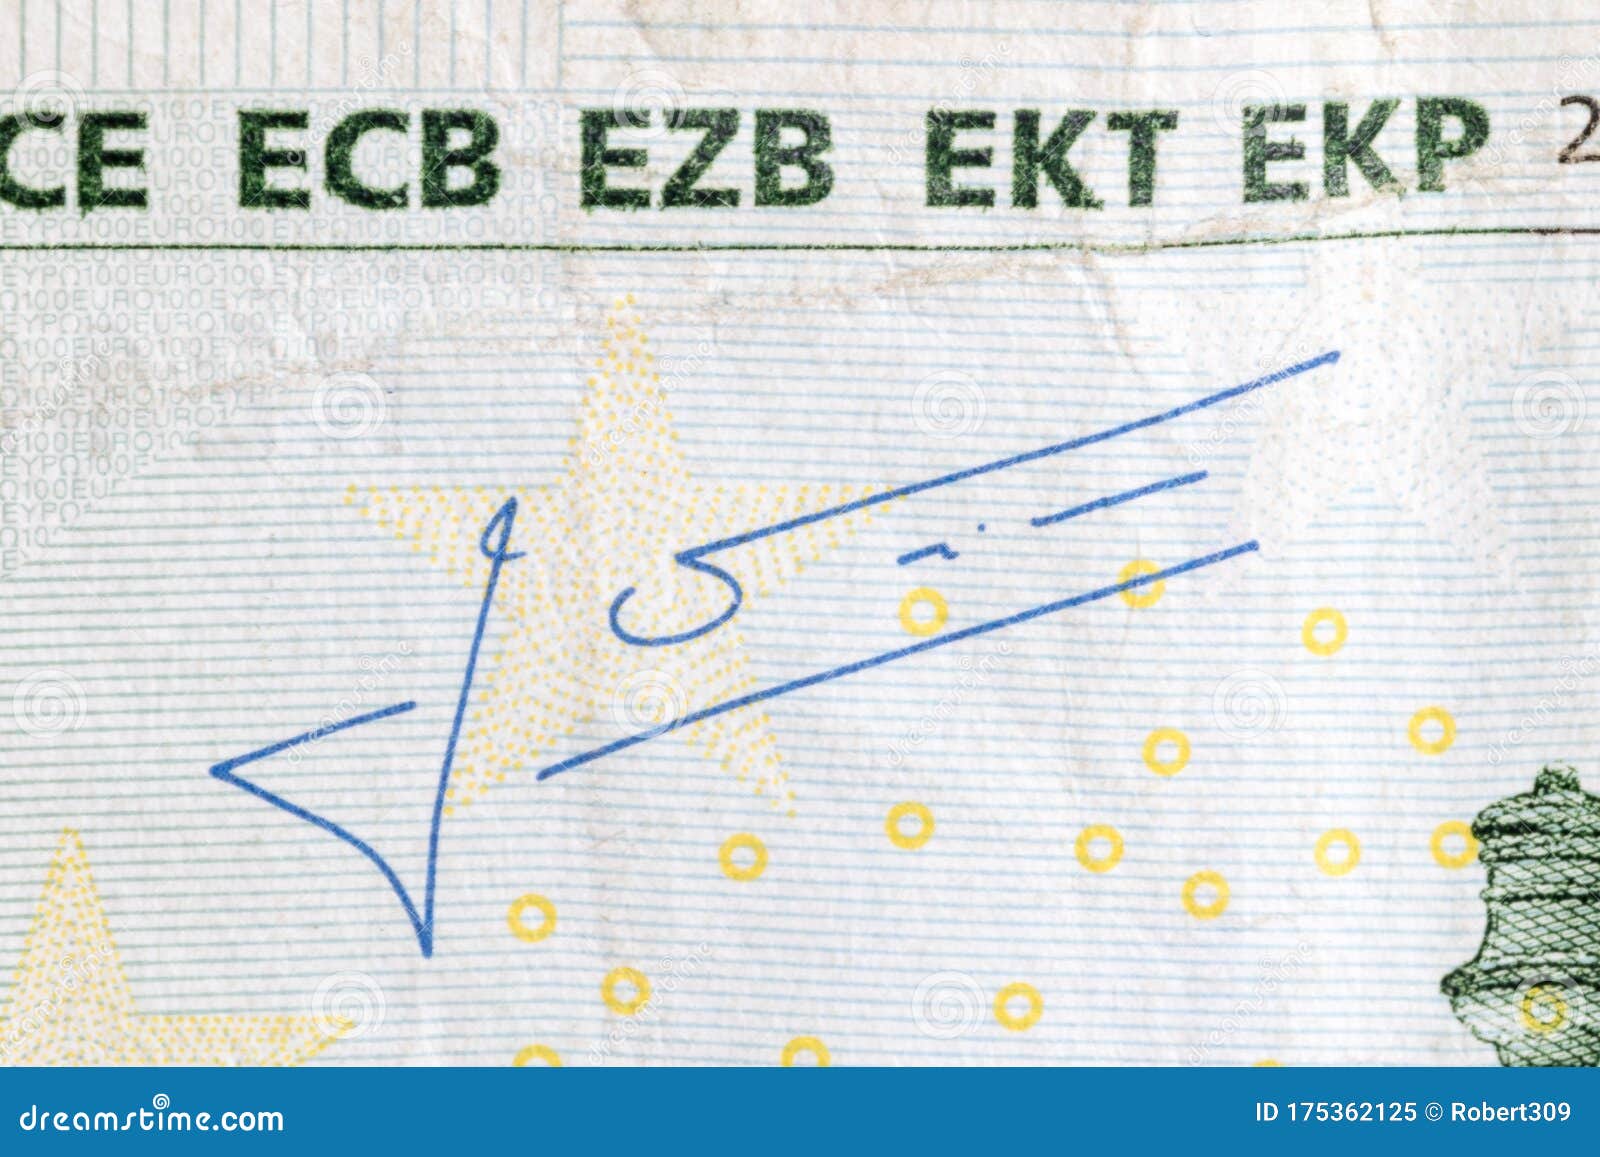 jean-claude trichet`s signature on 100 euro banknote. mario draghi is president of the european central bank